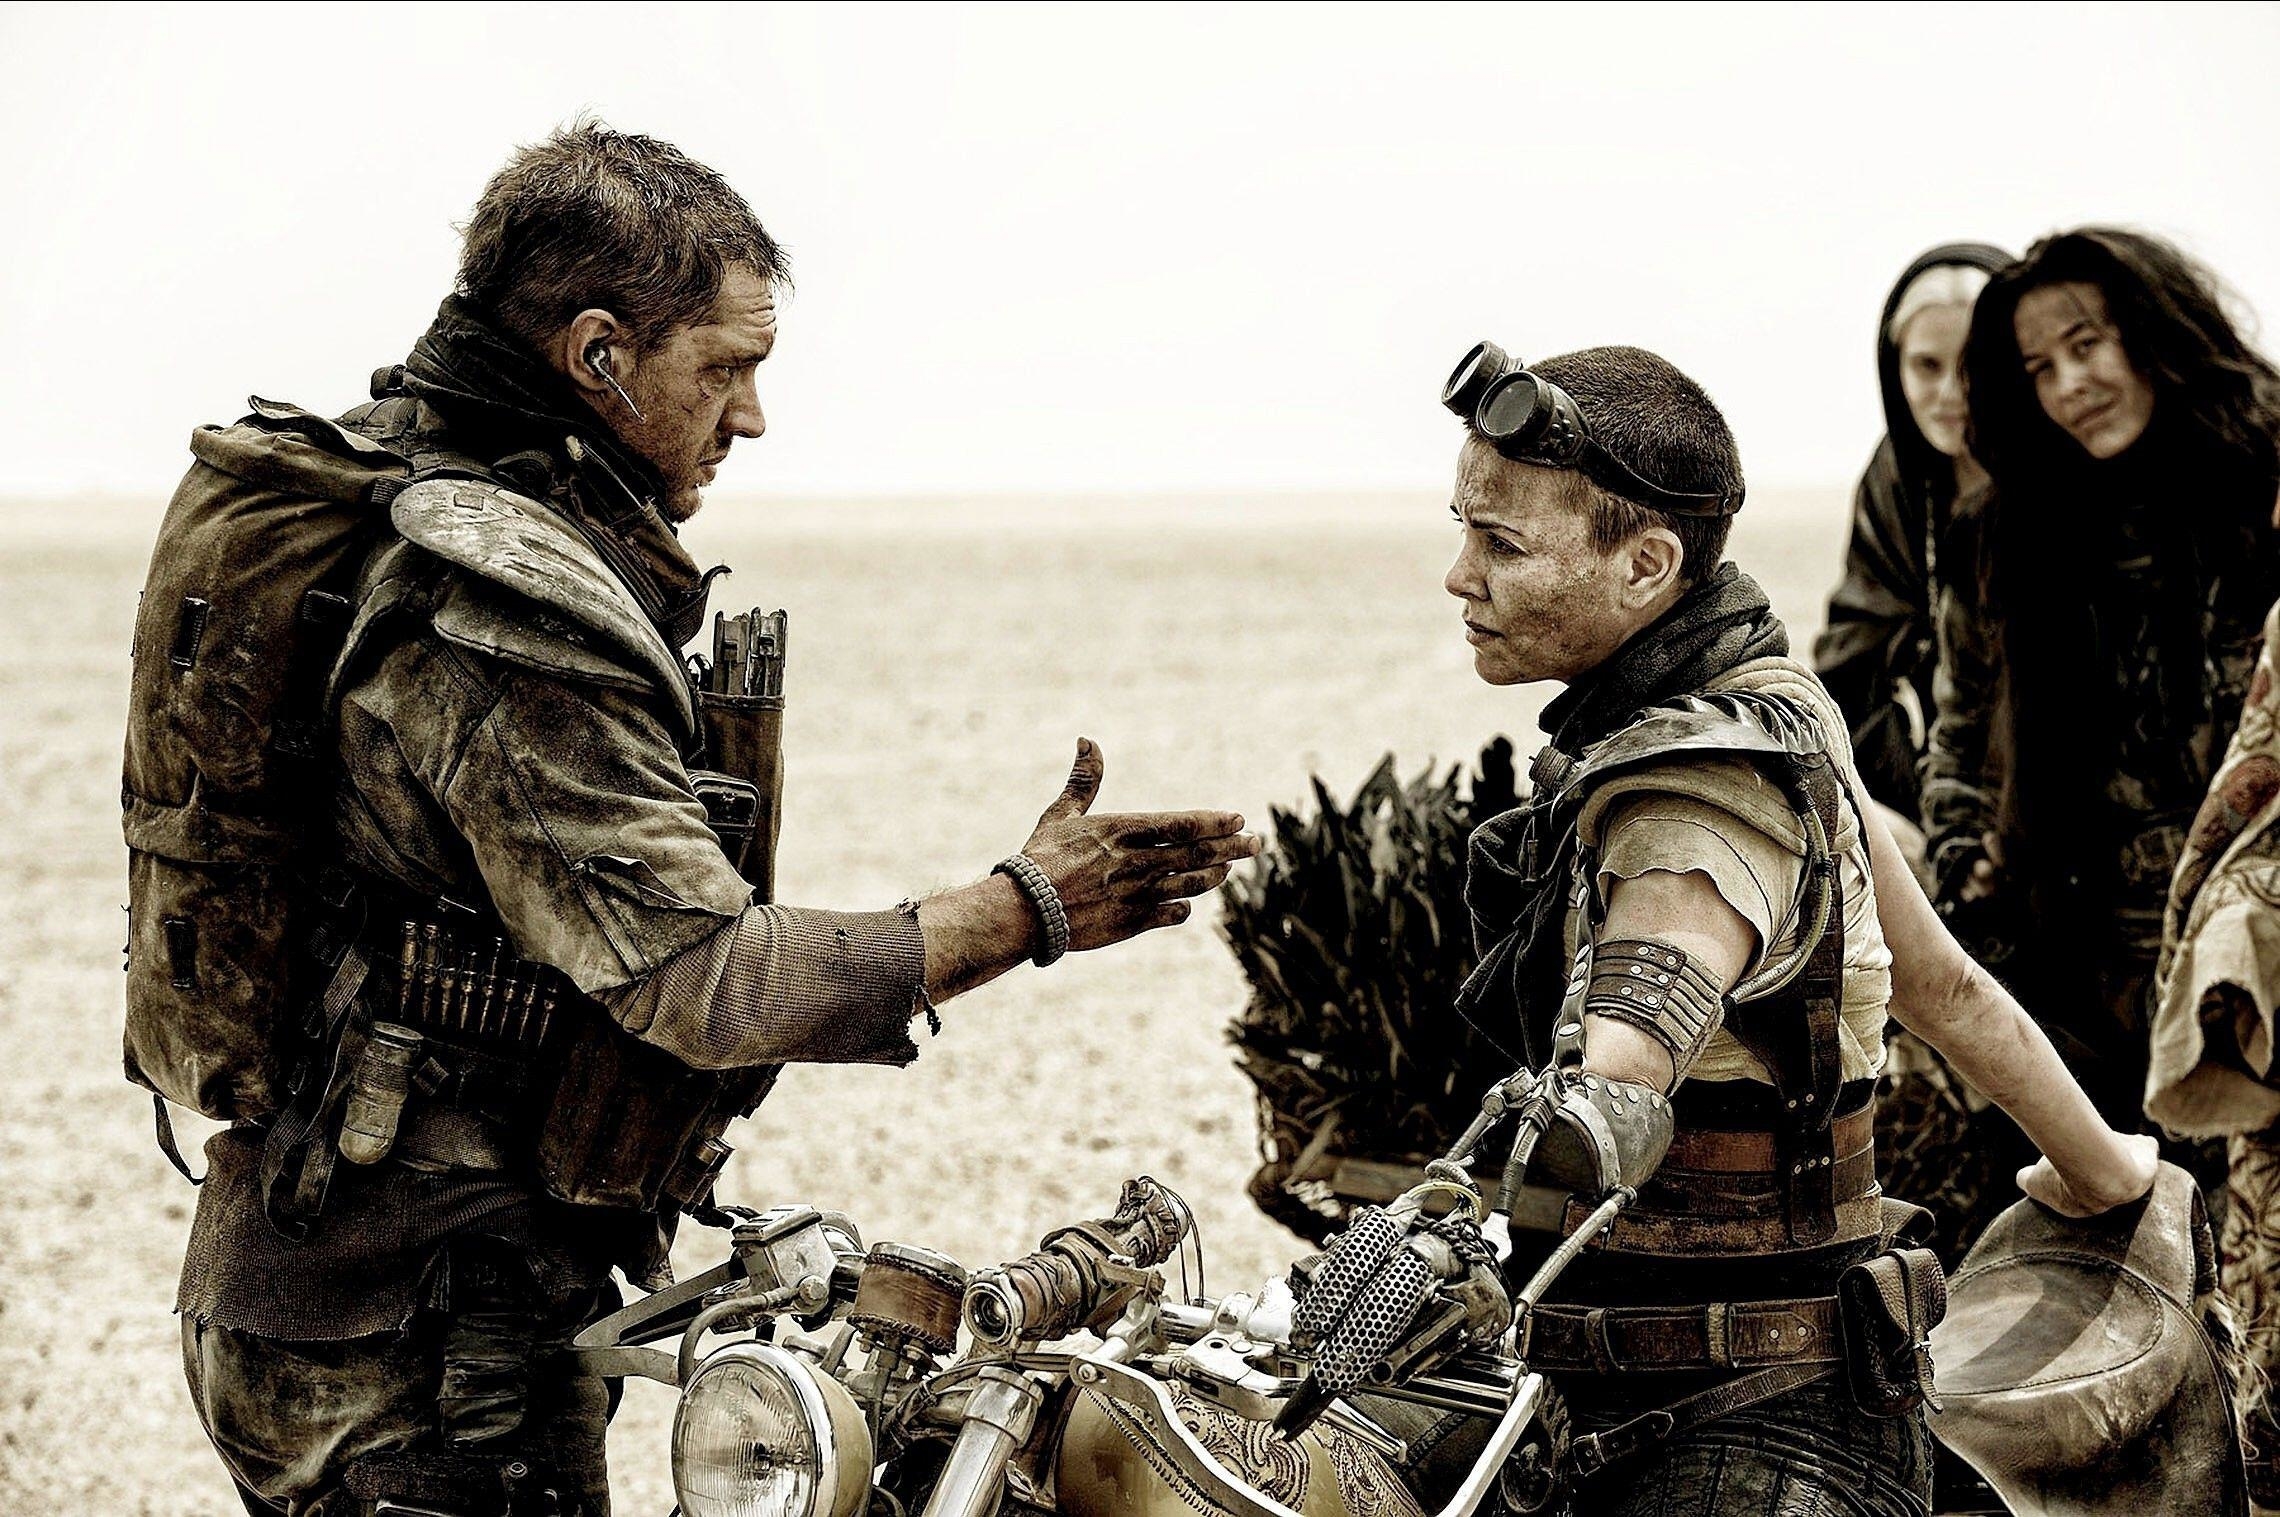 Tom Hardy extends a handshake to Charlize Theron in a dusty desert